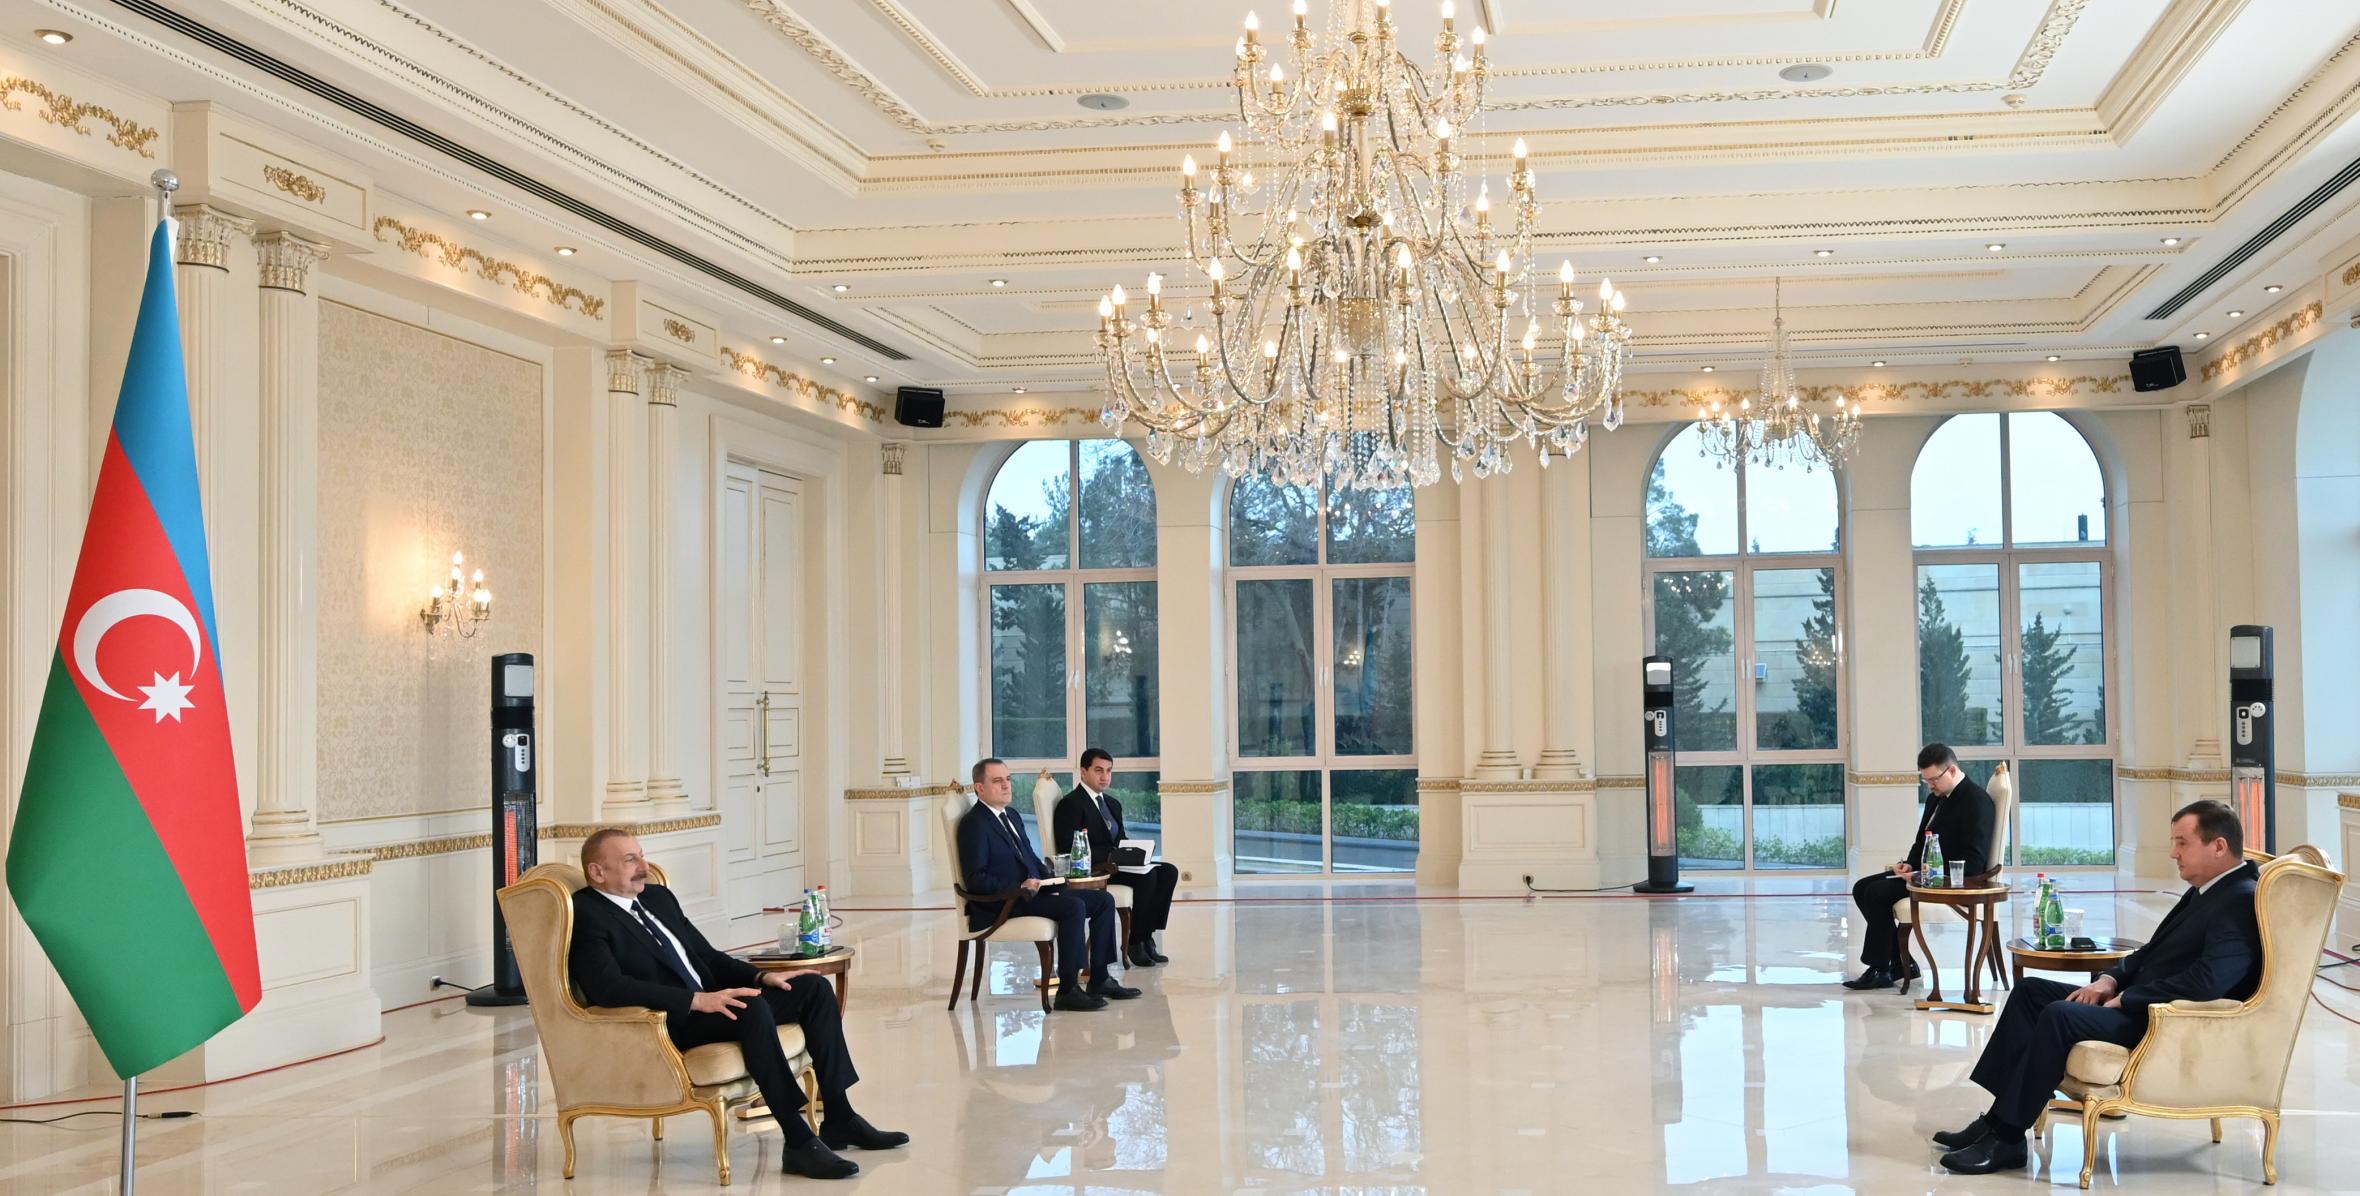 Ilham Aliyev has received credentials of the newly appointed Ambassador Extraordinary and Plenipotentiary of the Republic of Belarus Andrei Ravkov